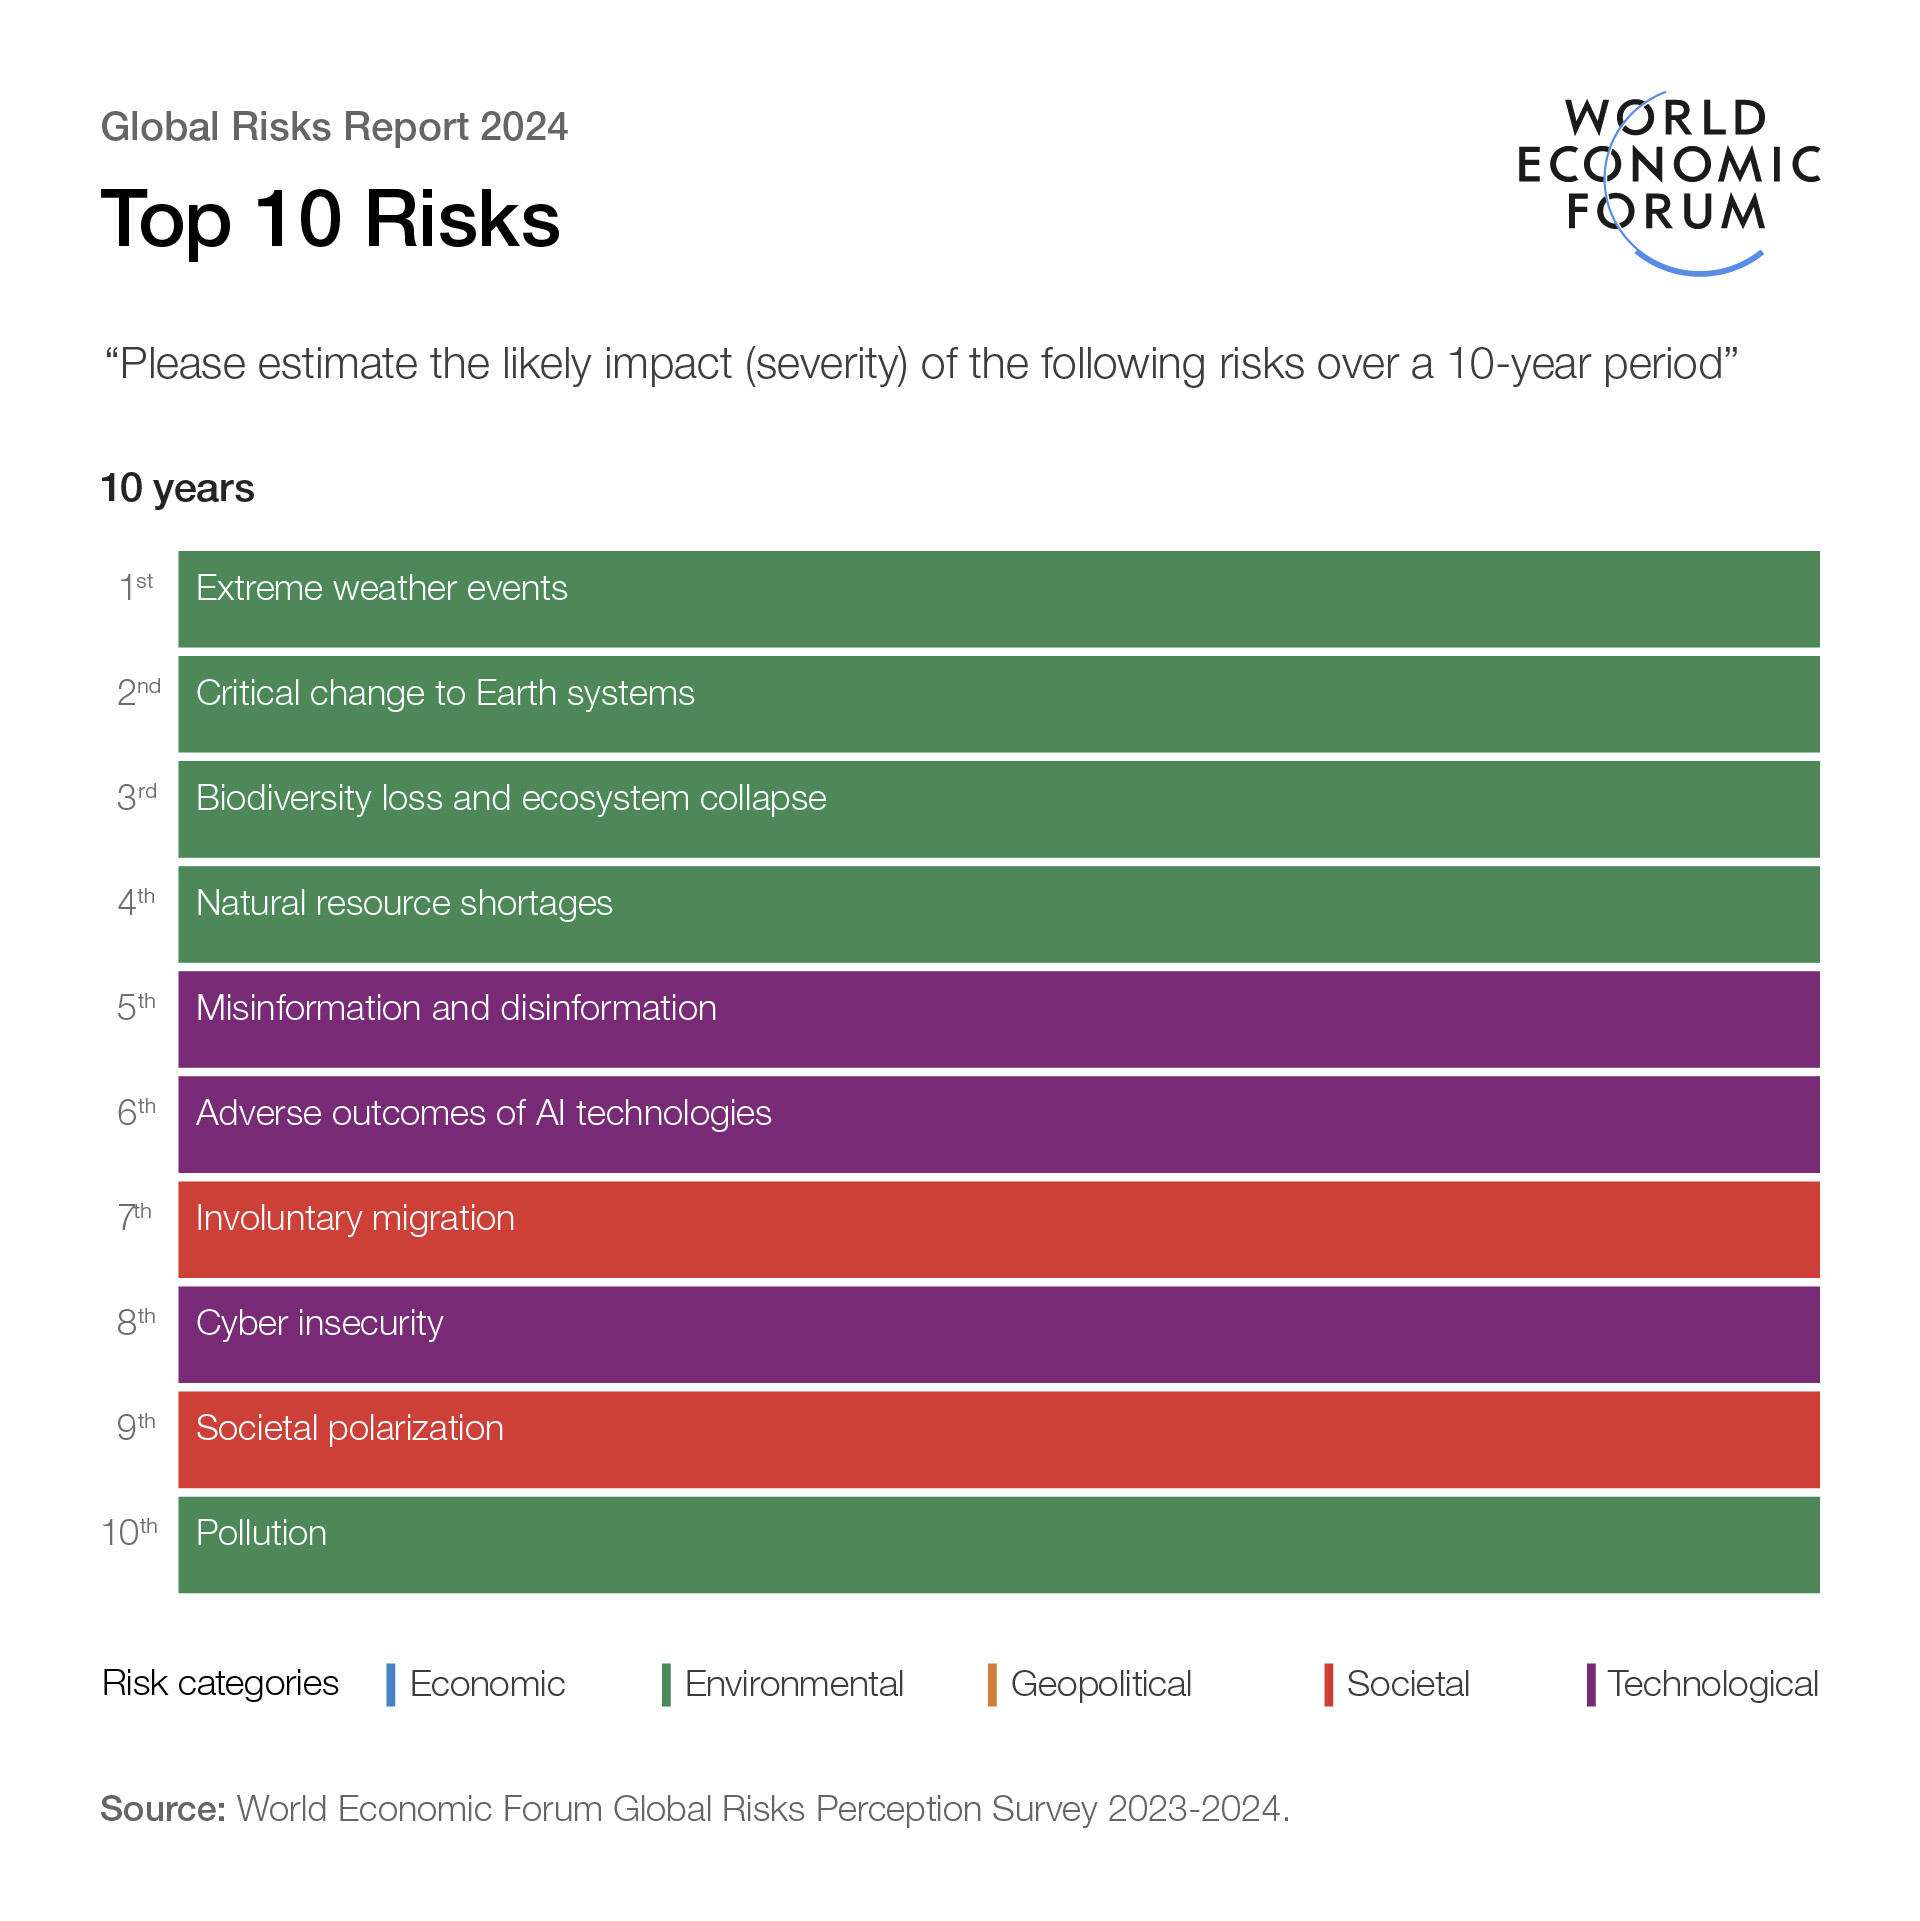 Top 10 global risks over a 10-year period.